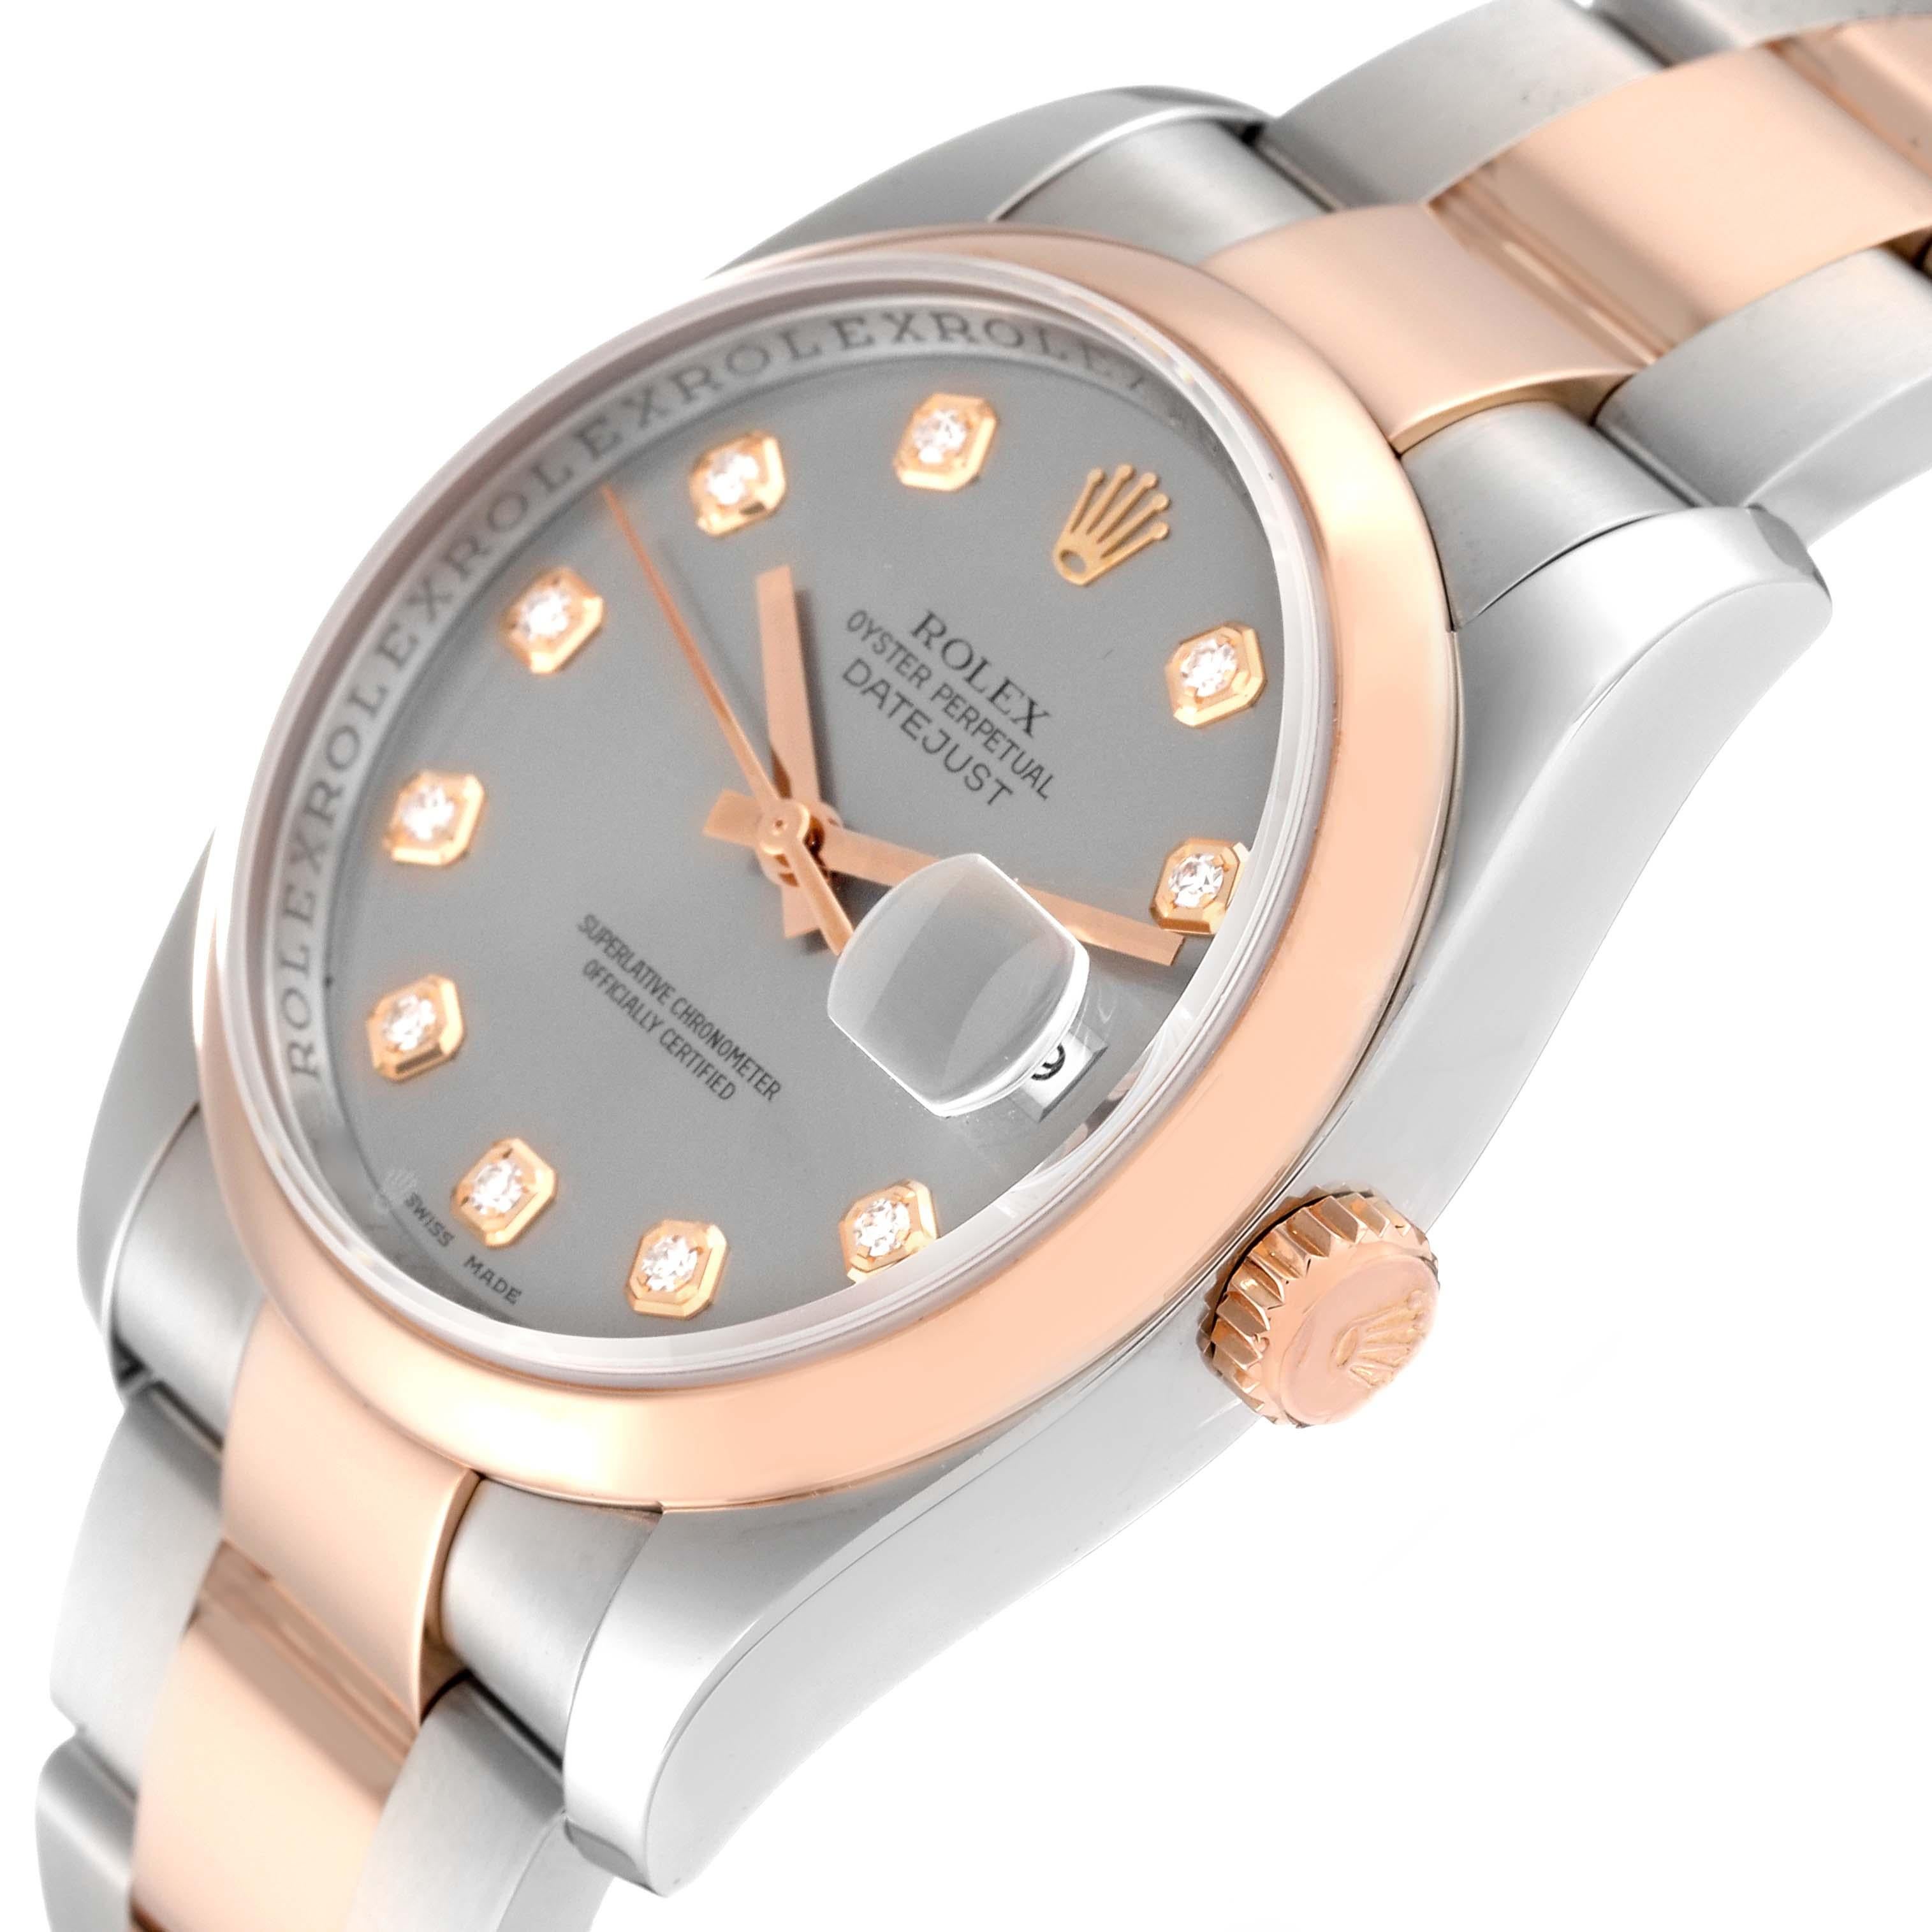 Rolex Datejust 36 Steel Rose Gold Silver Diamond Dial Mens Watch 116201 Box Card. Officially certified chronometer automatic self-winding movement with quickset date. Stainless steel case 36 mm in diameter.  Rolex logo on an 18k Everose gold crown.